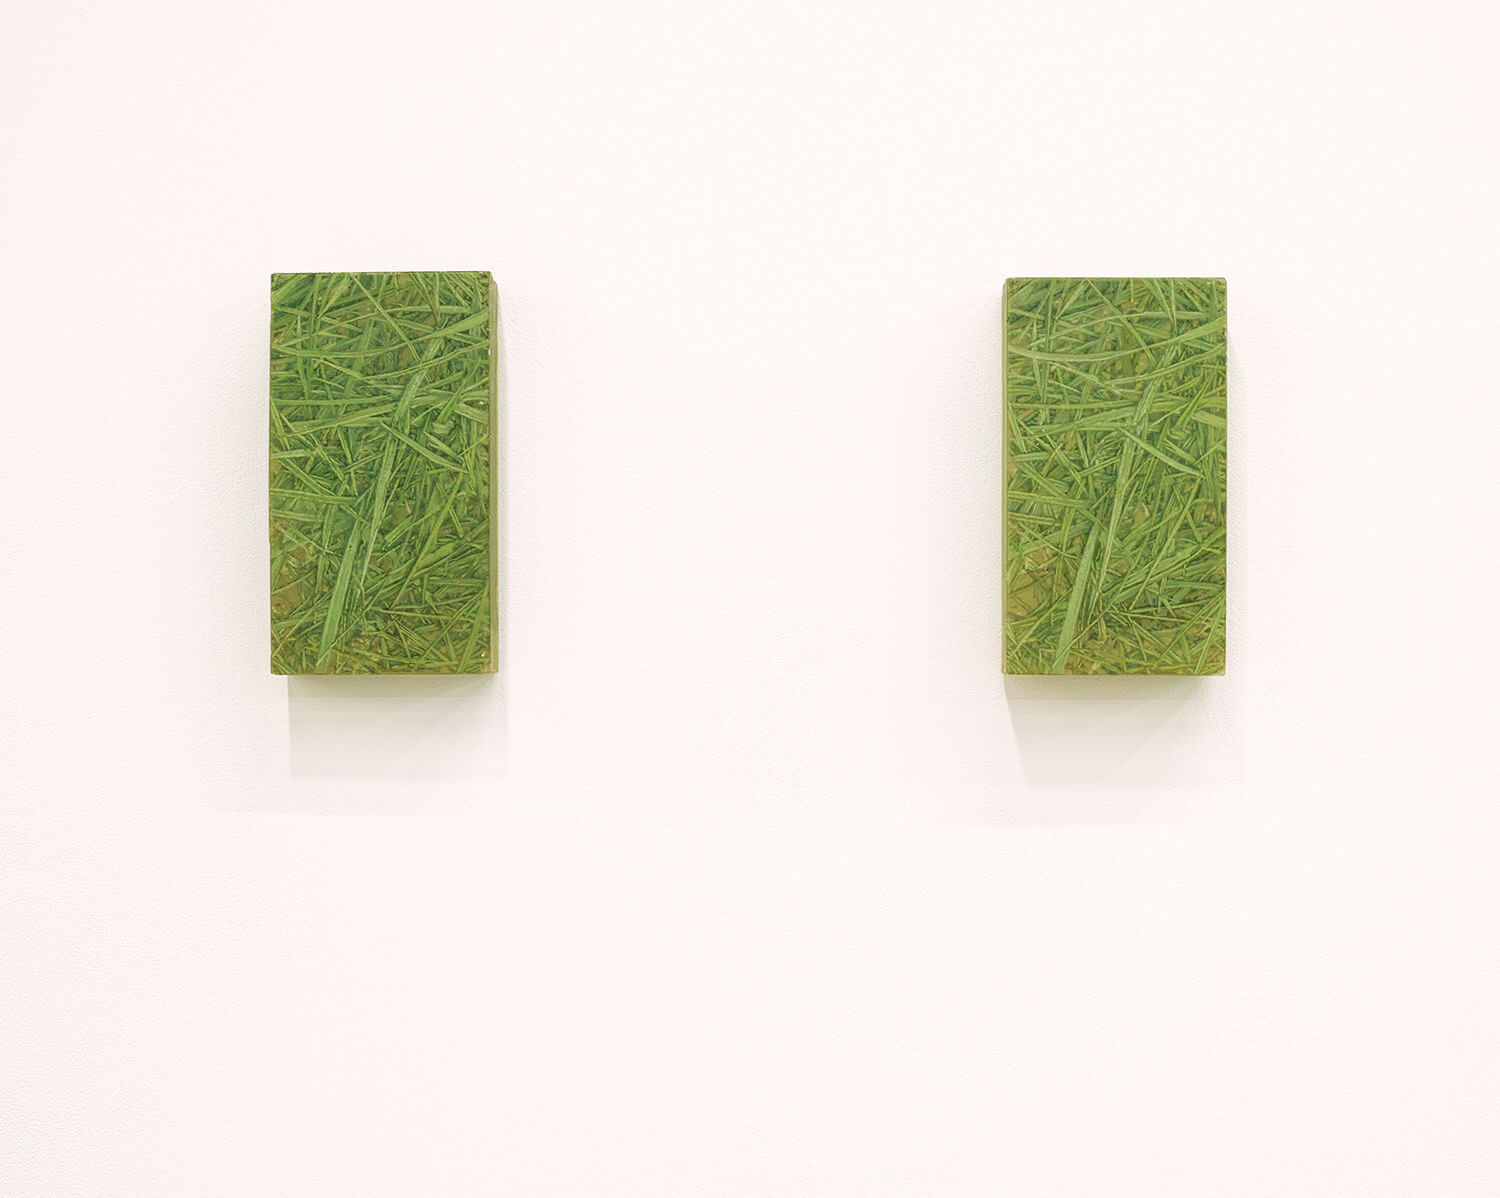 Photo painting「The grass 08-2」｜Oil on polyester resin panel｜14.5 x 8 x 3 cm｜2008 <br>Photo painting「The grass 08-3」｜Oil on polyester resin panel｜14.5 x 8 x 3 cm｜2008<br>¥100,000 - 250,000 each